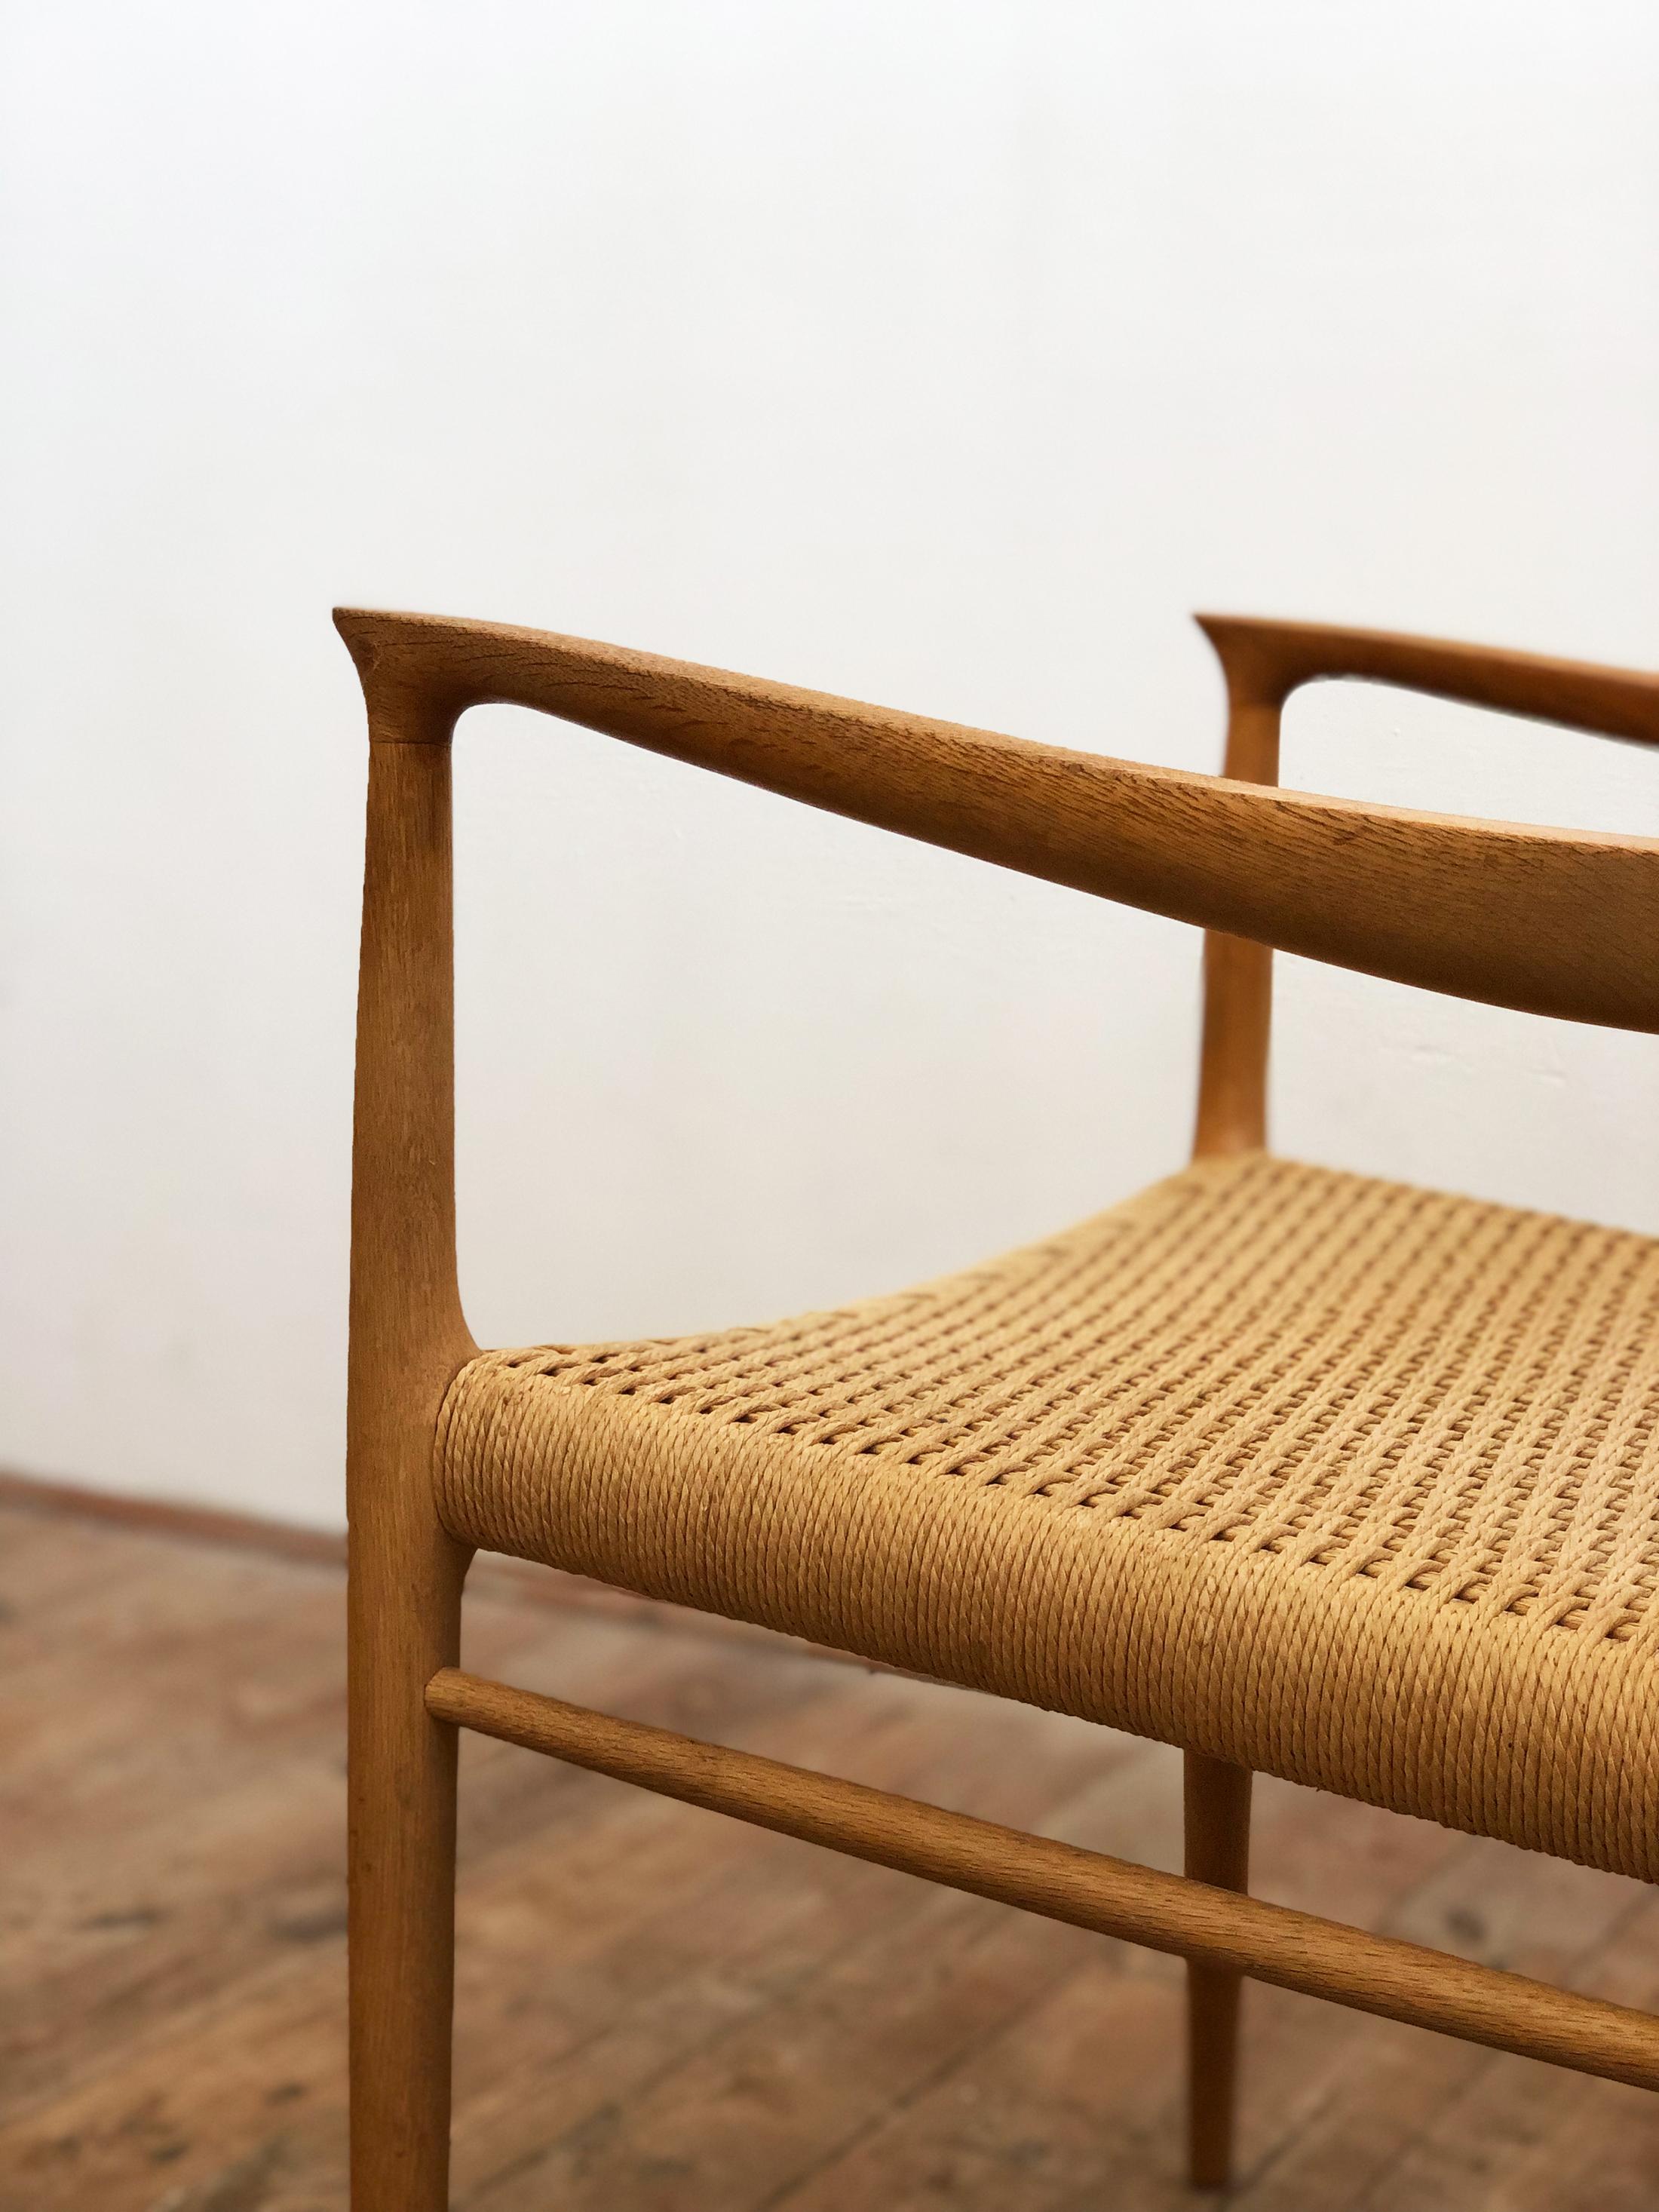 Midcentury Oak Dining Chairs, Model 56 by Niels O. Møller with Paper Cord Seats 1